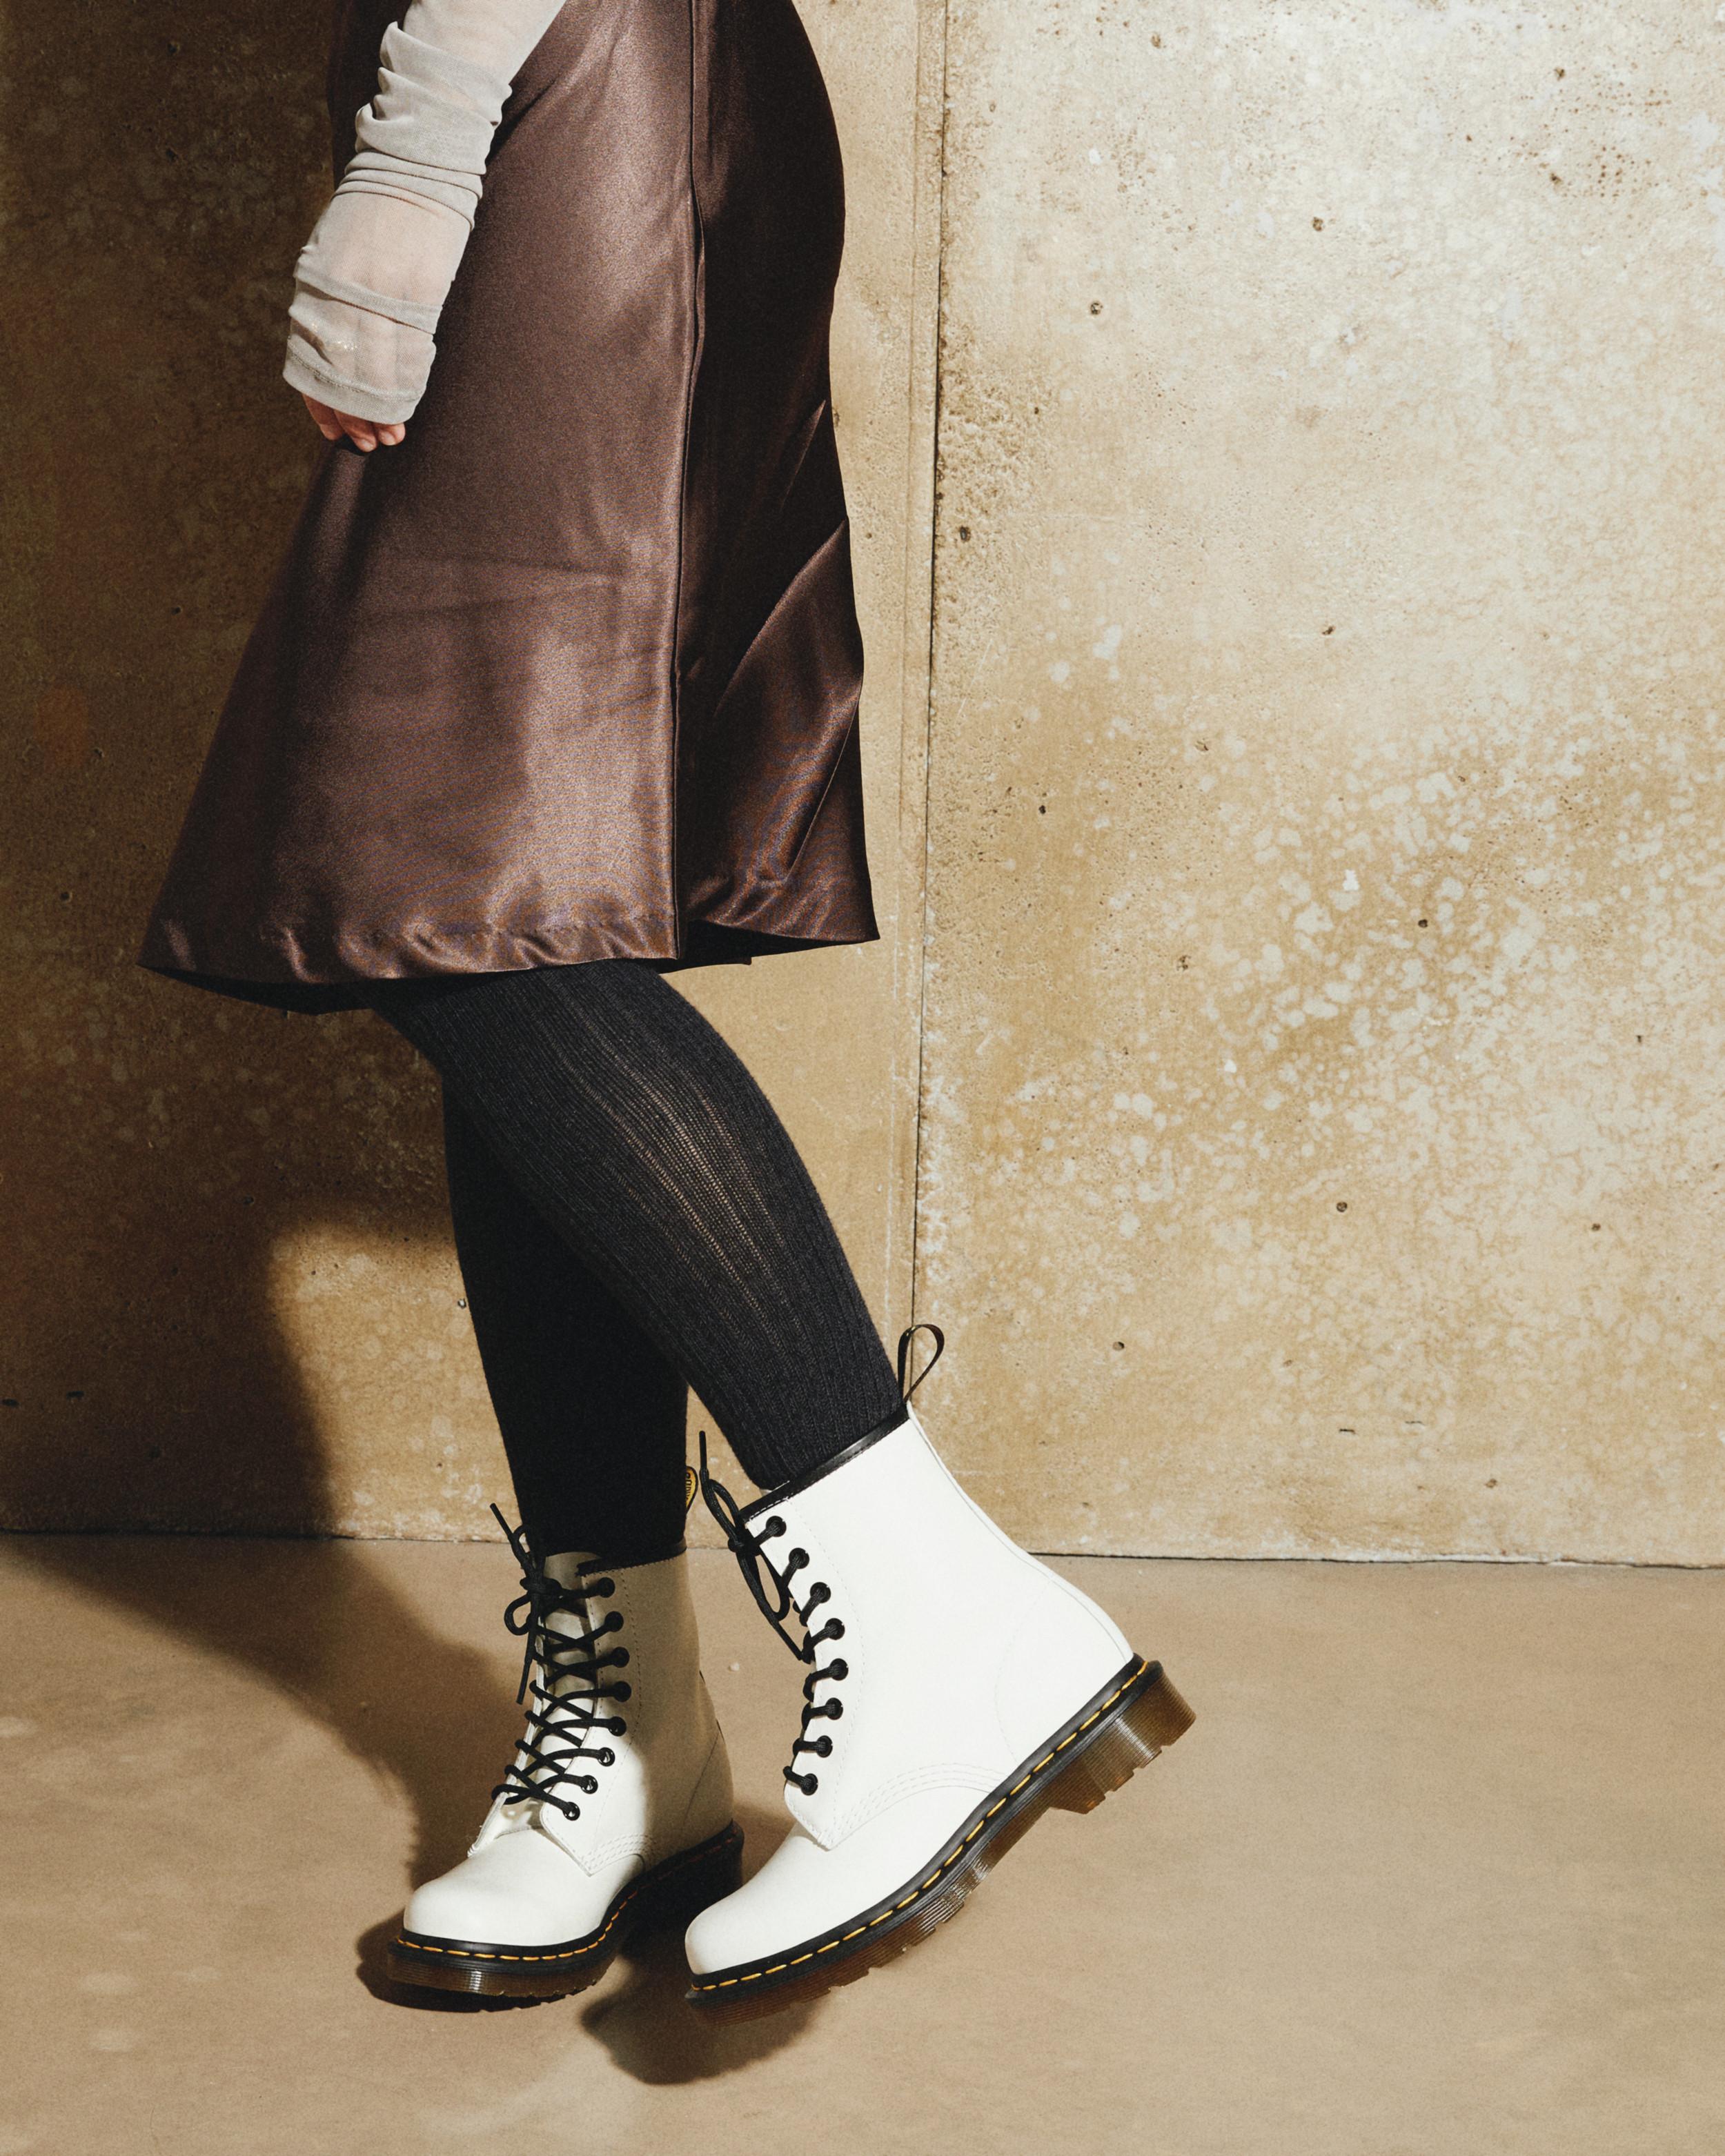 Dr. Martens 1460 Smooth Leather Boots for Women in White